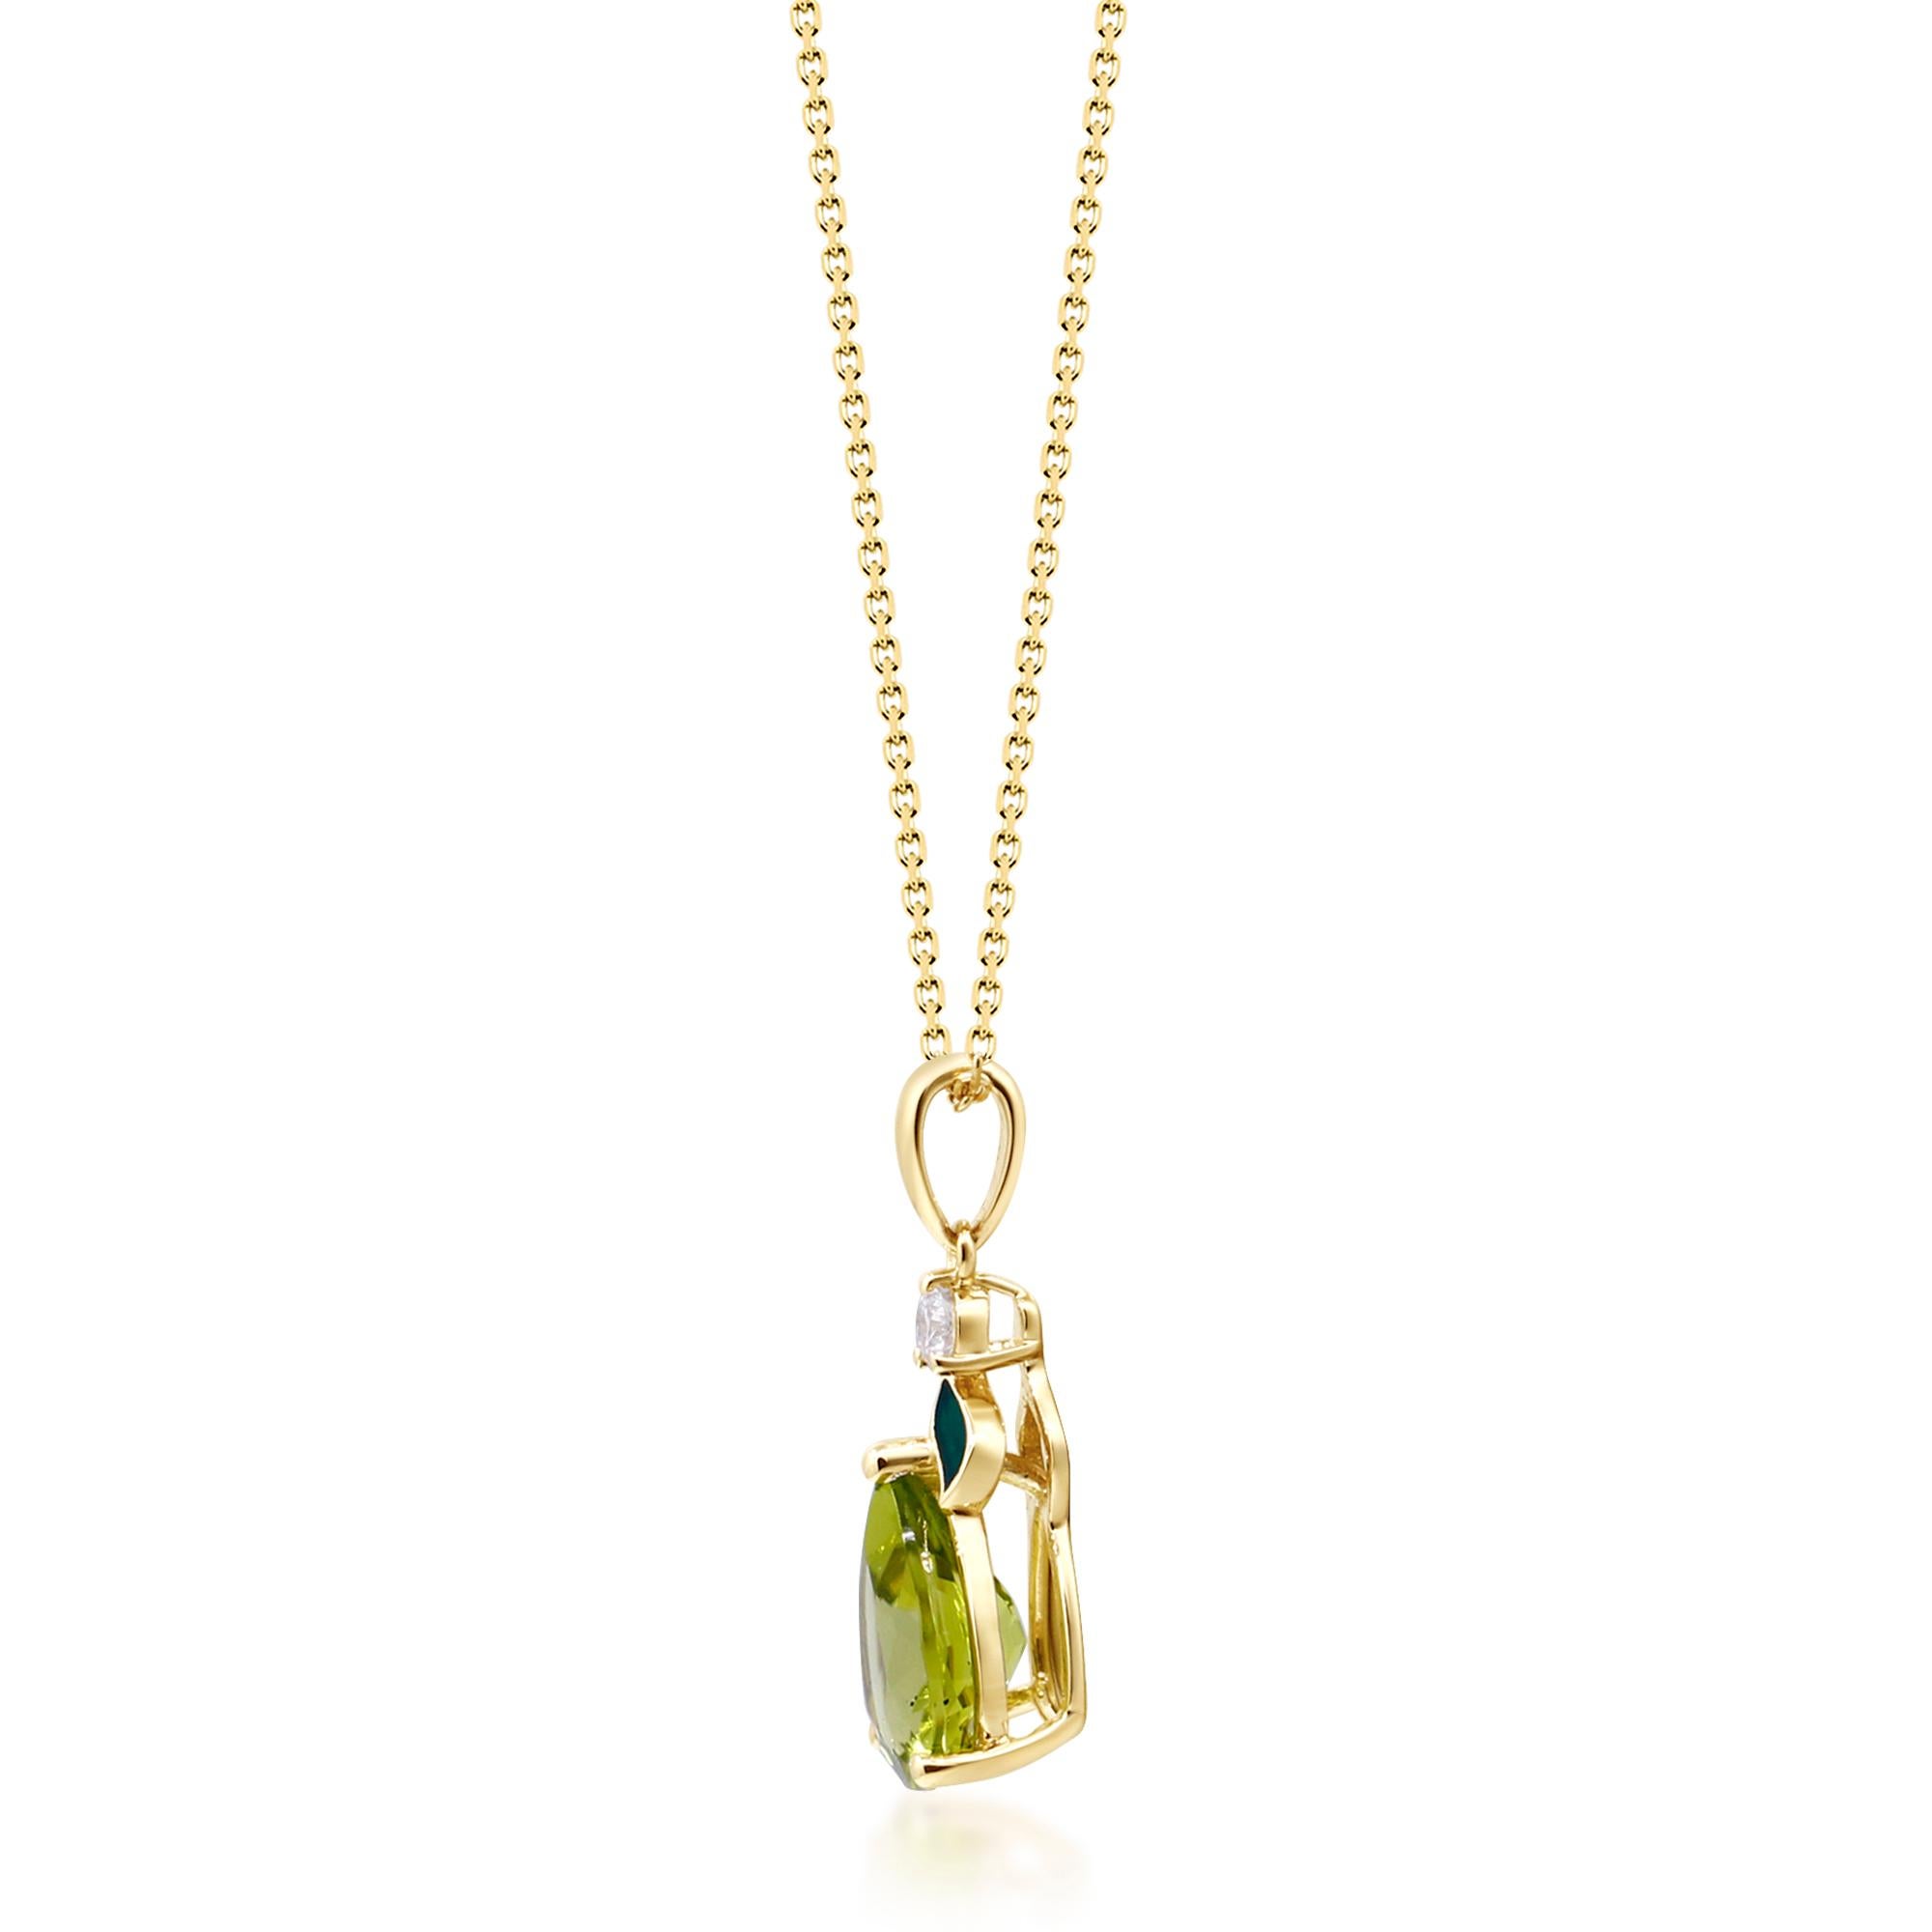 Art Deco 1.75 Carat Pear-Cut Peridot with Diamond Accents 10K Yellow Gold Pendant For Sale